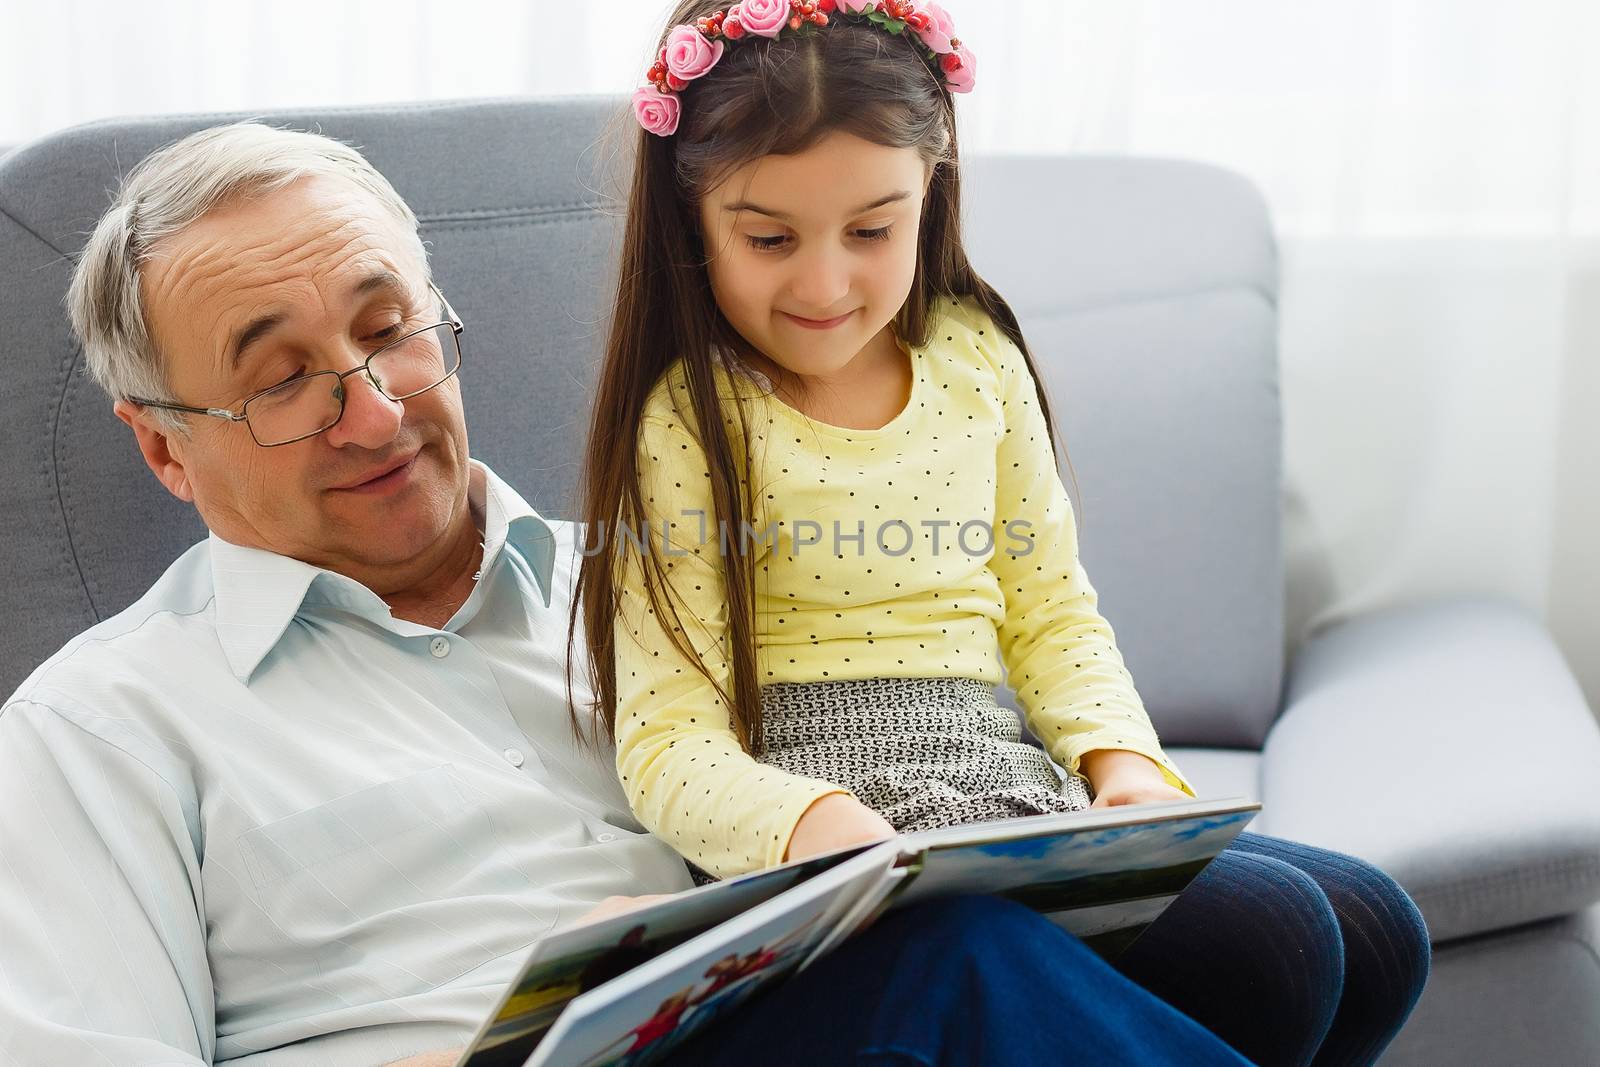 Granddaughter and grandfather watching photos together in a photo album at home